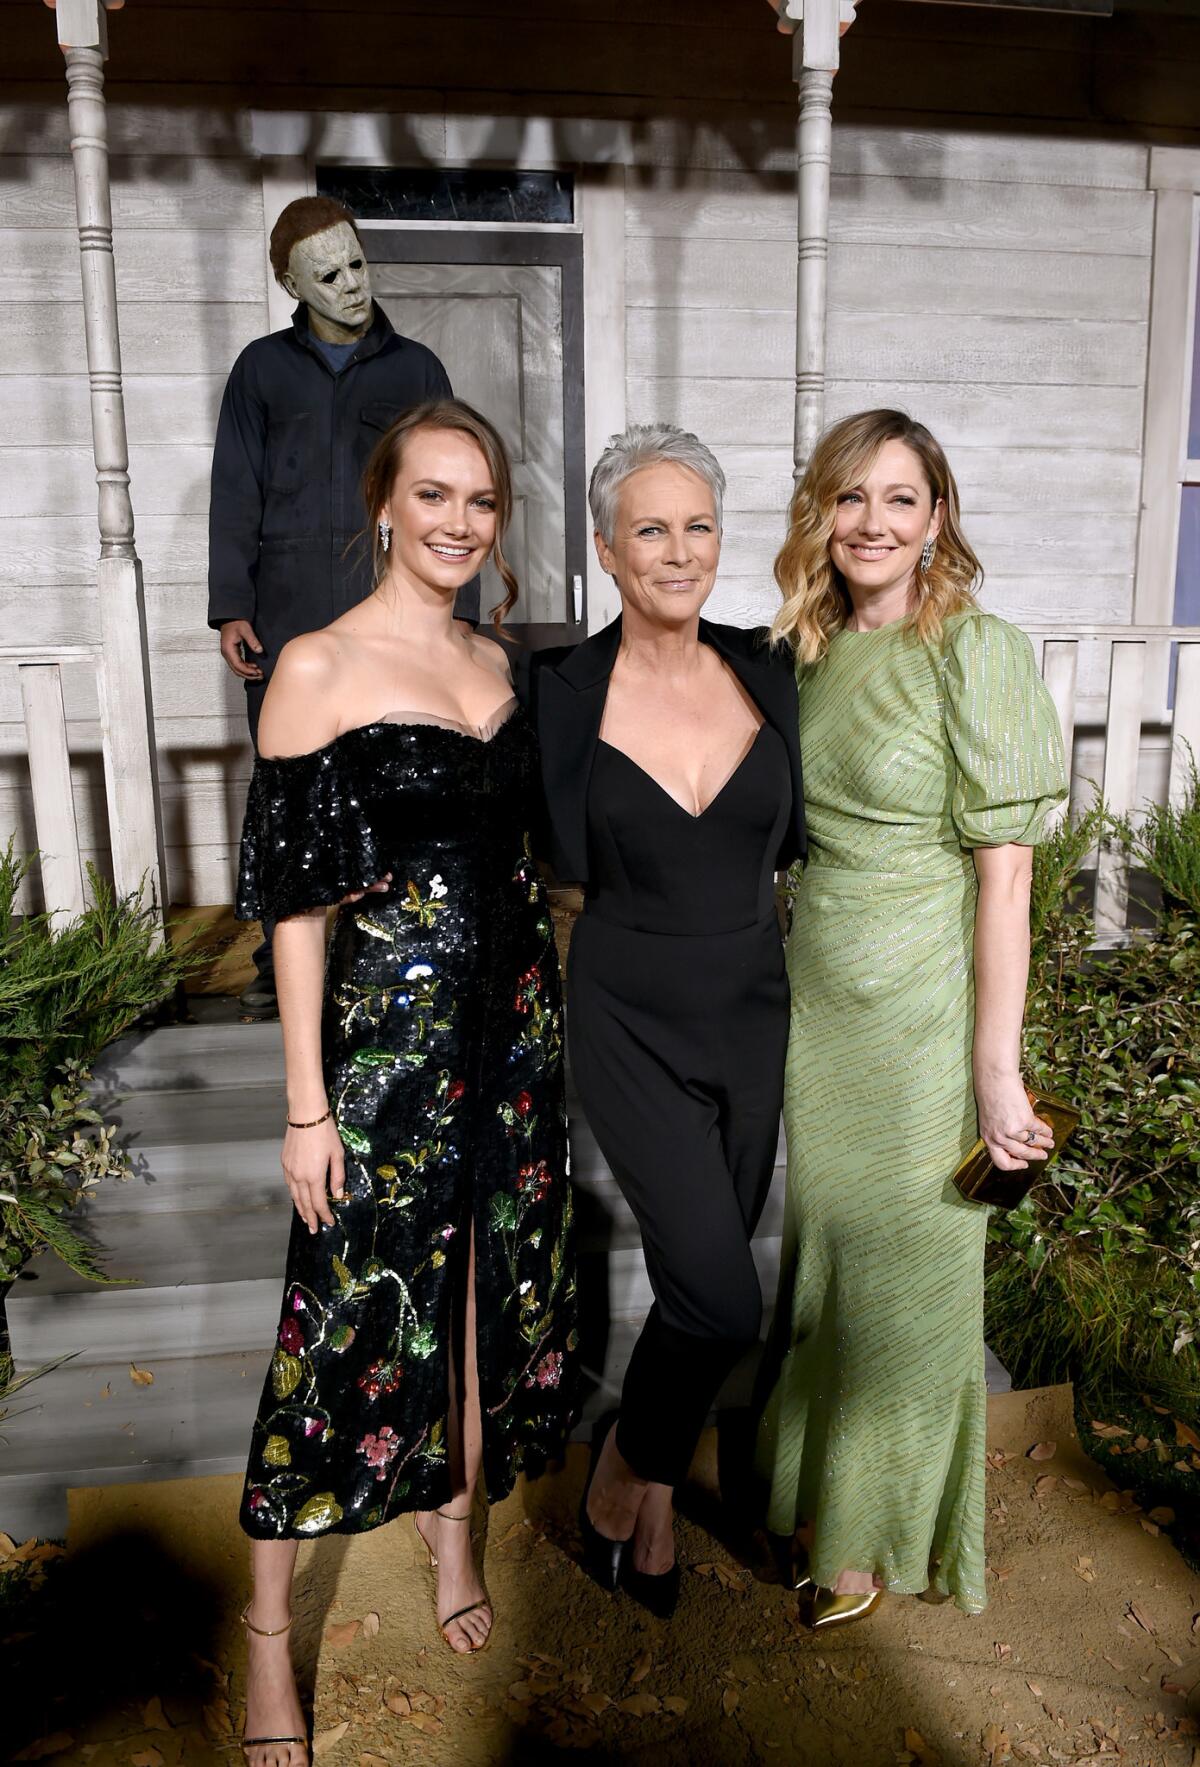 Andi Matichak, left, Jamie Lee Curtis and Judy Greer attend the Universal Pictures' "Halloween" premiere at TCL Chinese Theatre on Oct. 17 in Hollywood.